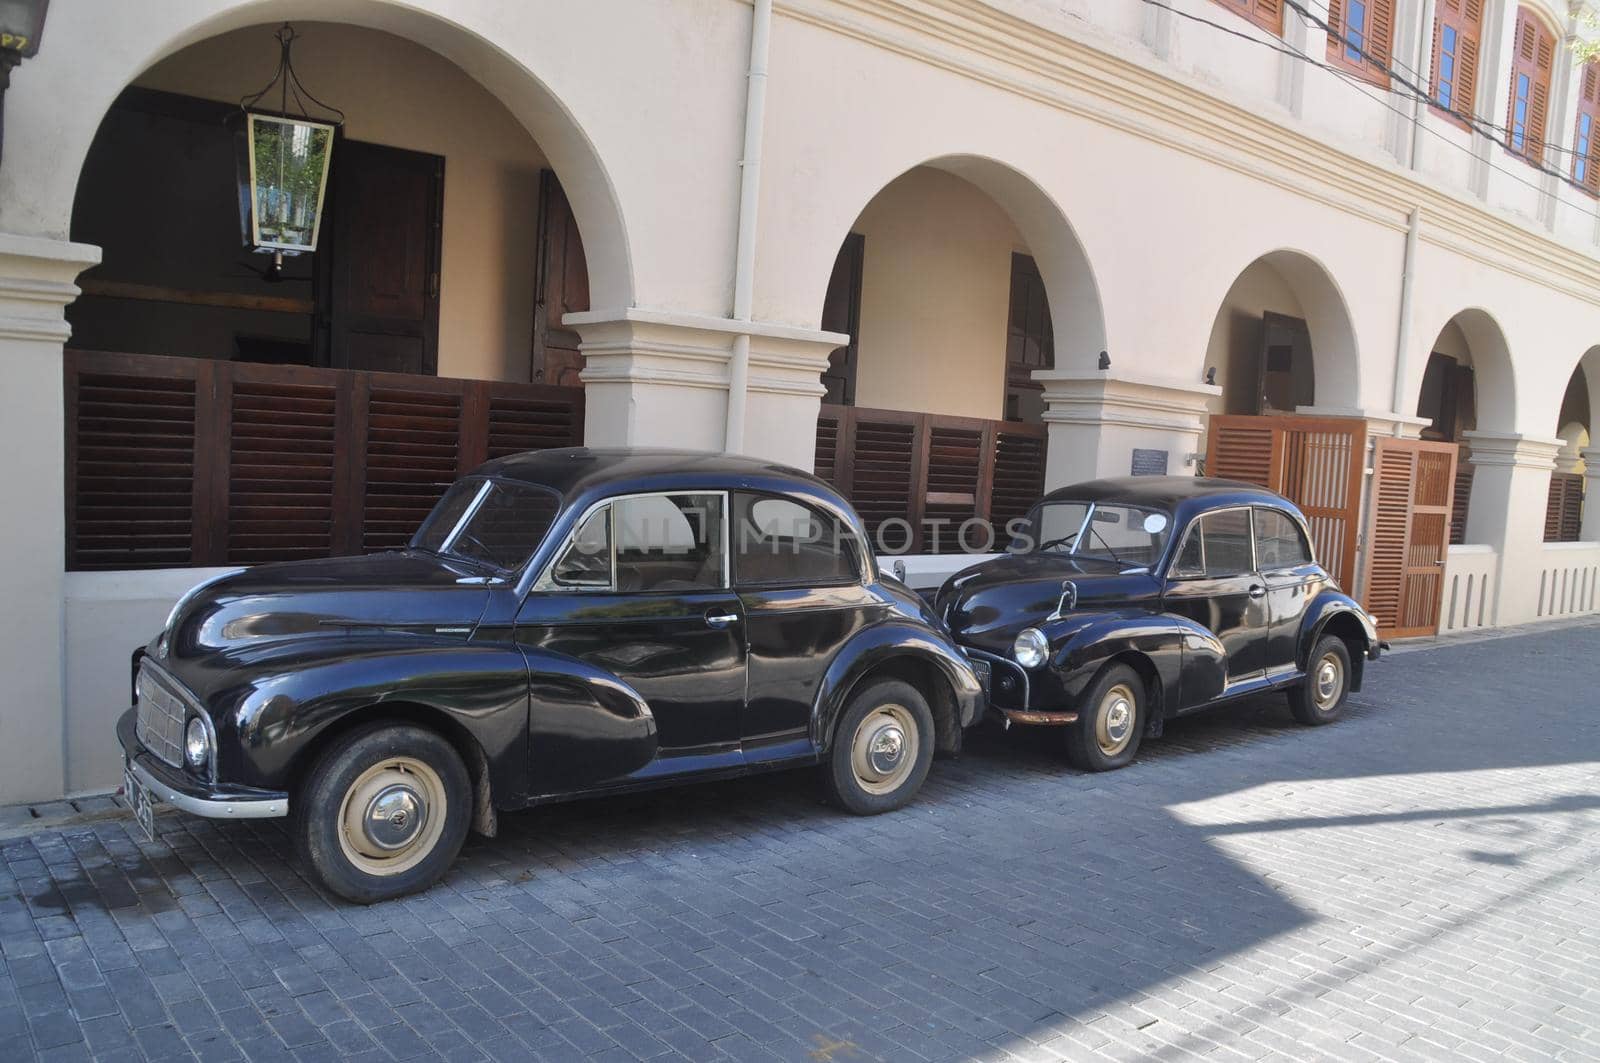 Restored cars in the city of Galle, Sri Lanka by Capos